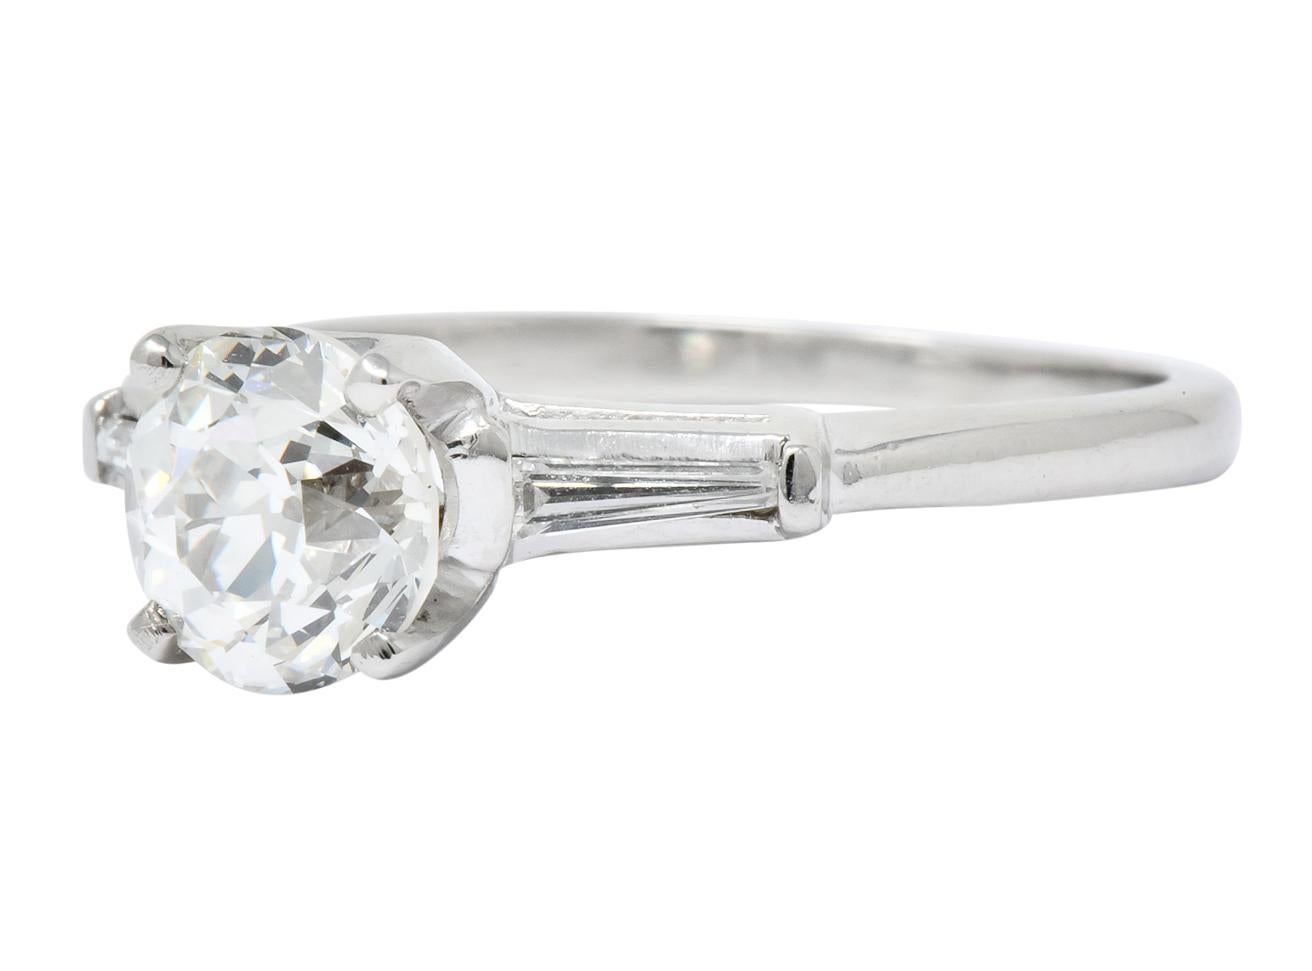 Cathedral style ring centering an old European cut diamond weighing 1.51 carats, J color and VS1 clarity

Flanked by two bar set, tapered baguette diamonds weighing approximately 0.15 carat total, I color and VS clarity

Stamped 10% Irid Platinum